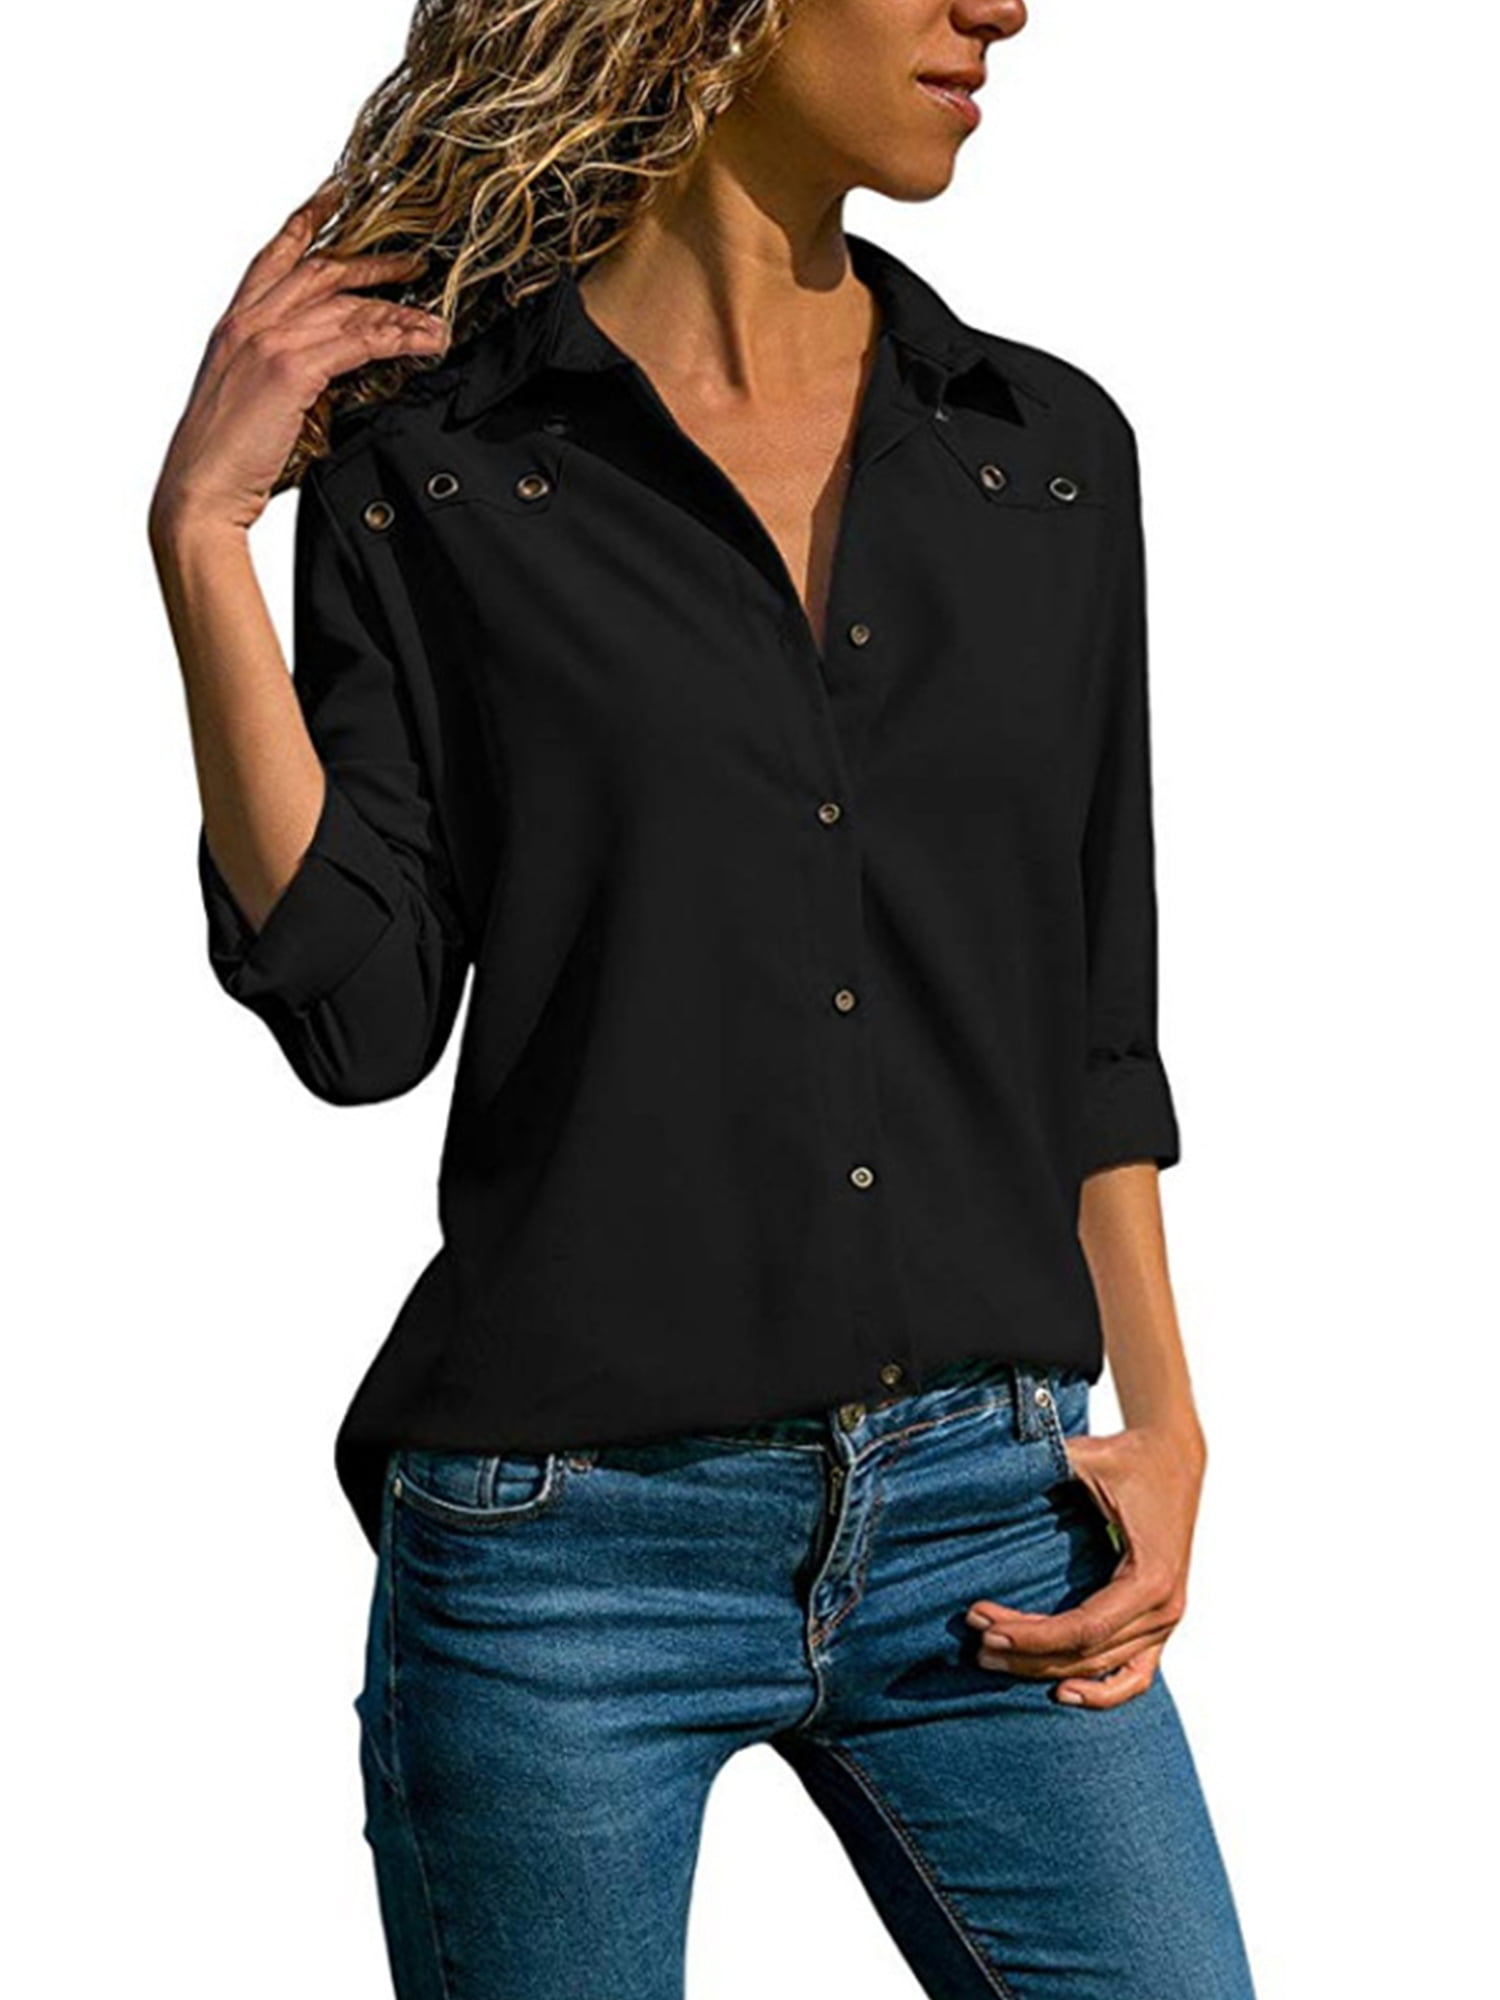 RUWQ Button Down V Neck Shirts Long Sleeve Blouse Roll Up Cuffed Sleeve Casual Work Plain Tops with Pockets 